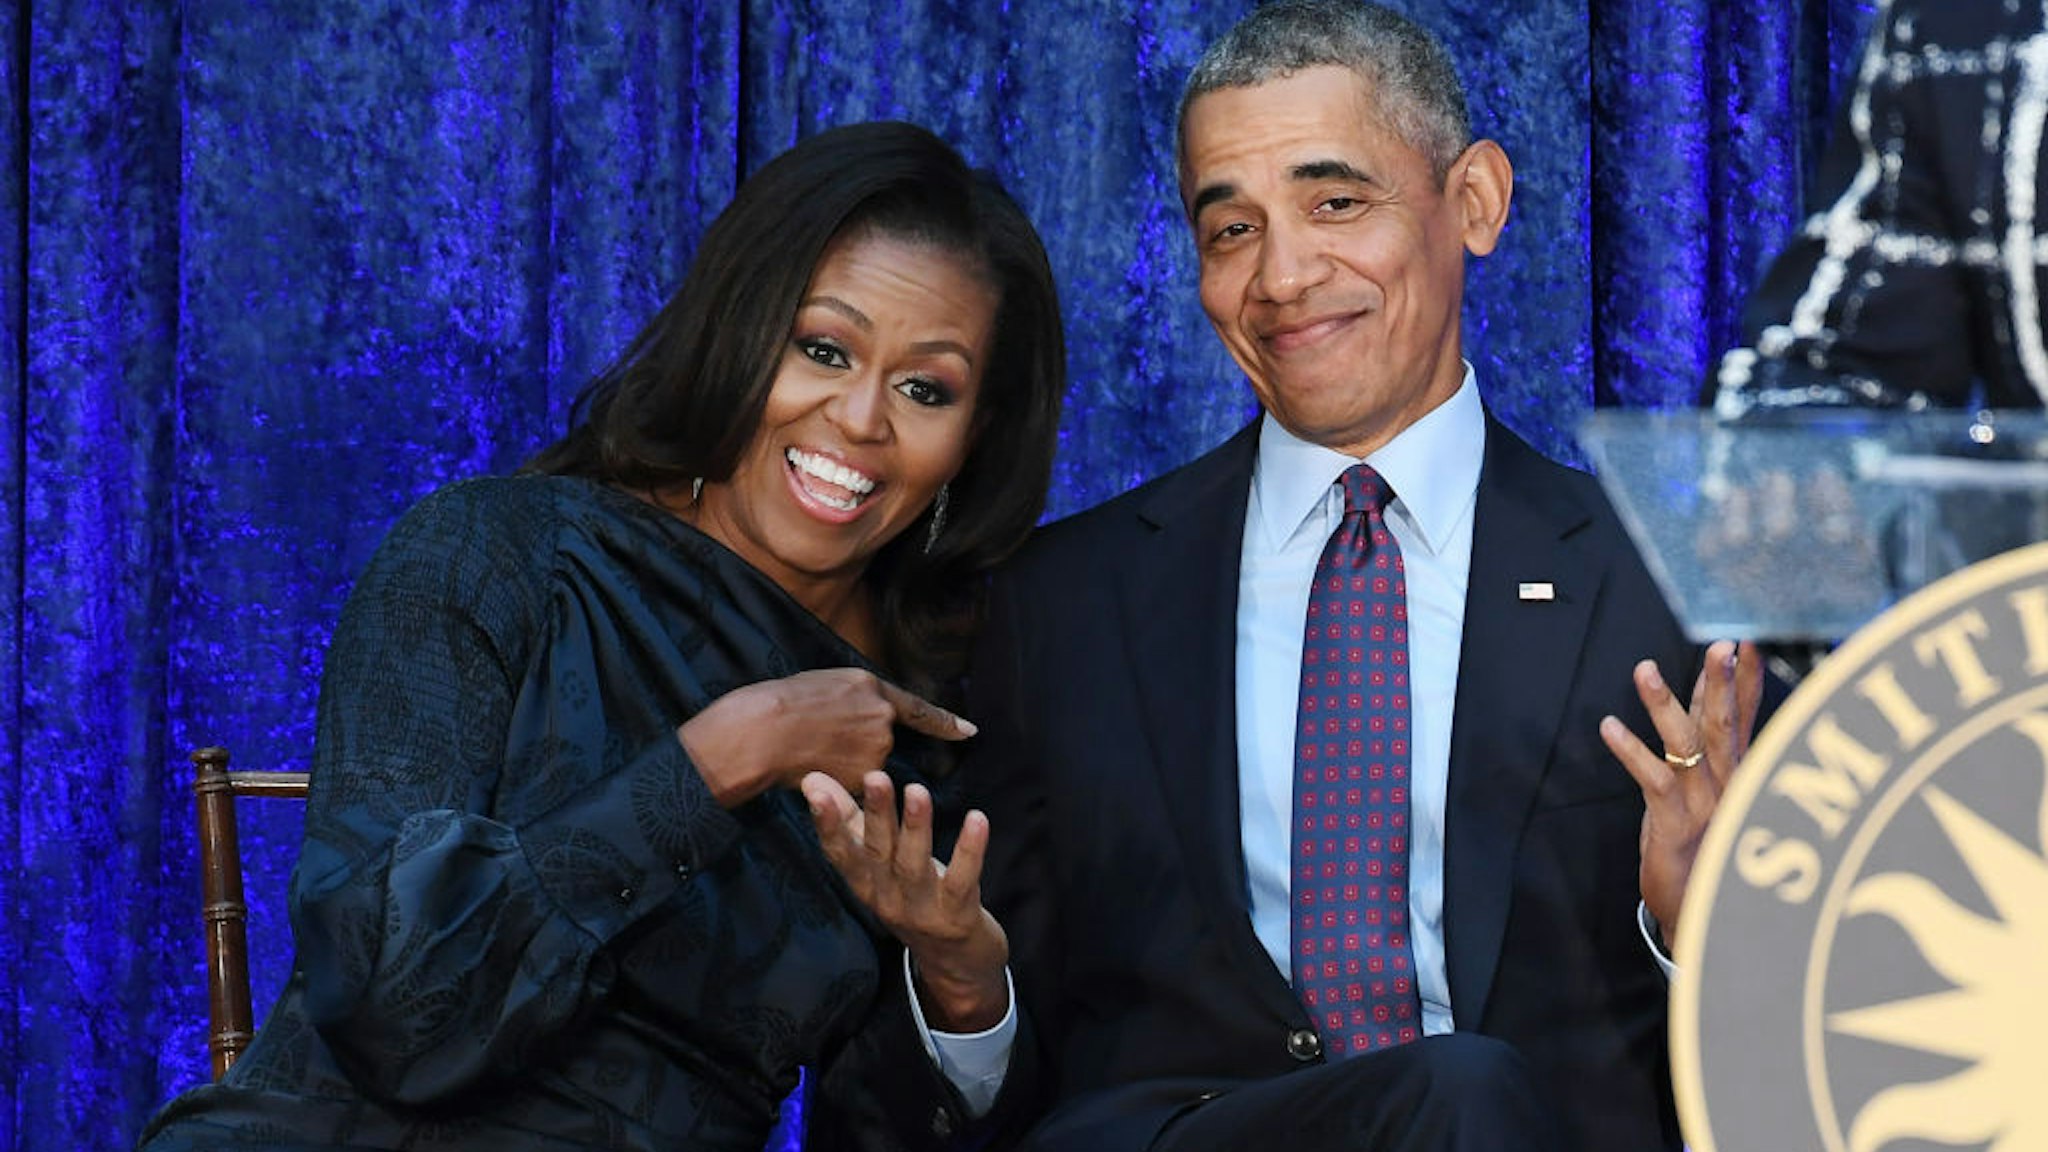 Former First Lady Michelle Obama and former President Barack Obama are seen after their portraits were unveiled at the Smithsonian National Portrait Gallery on Monday February 12, 2018 in Washington, DC.